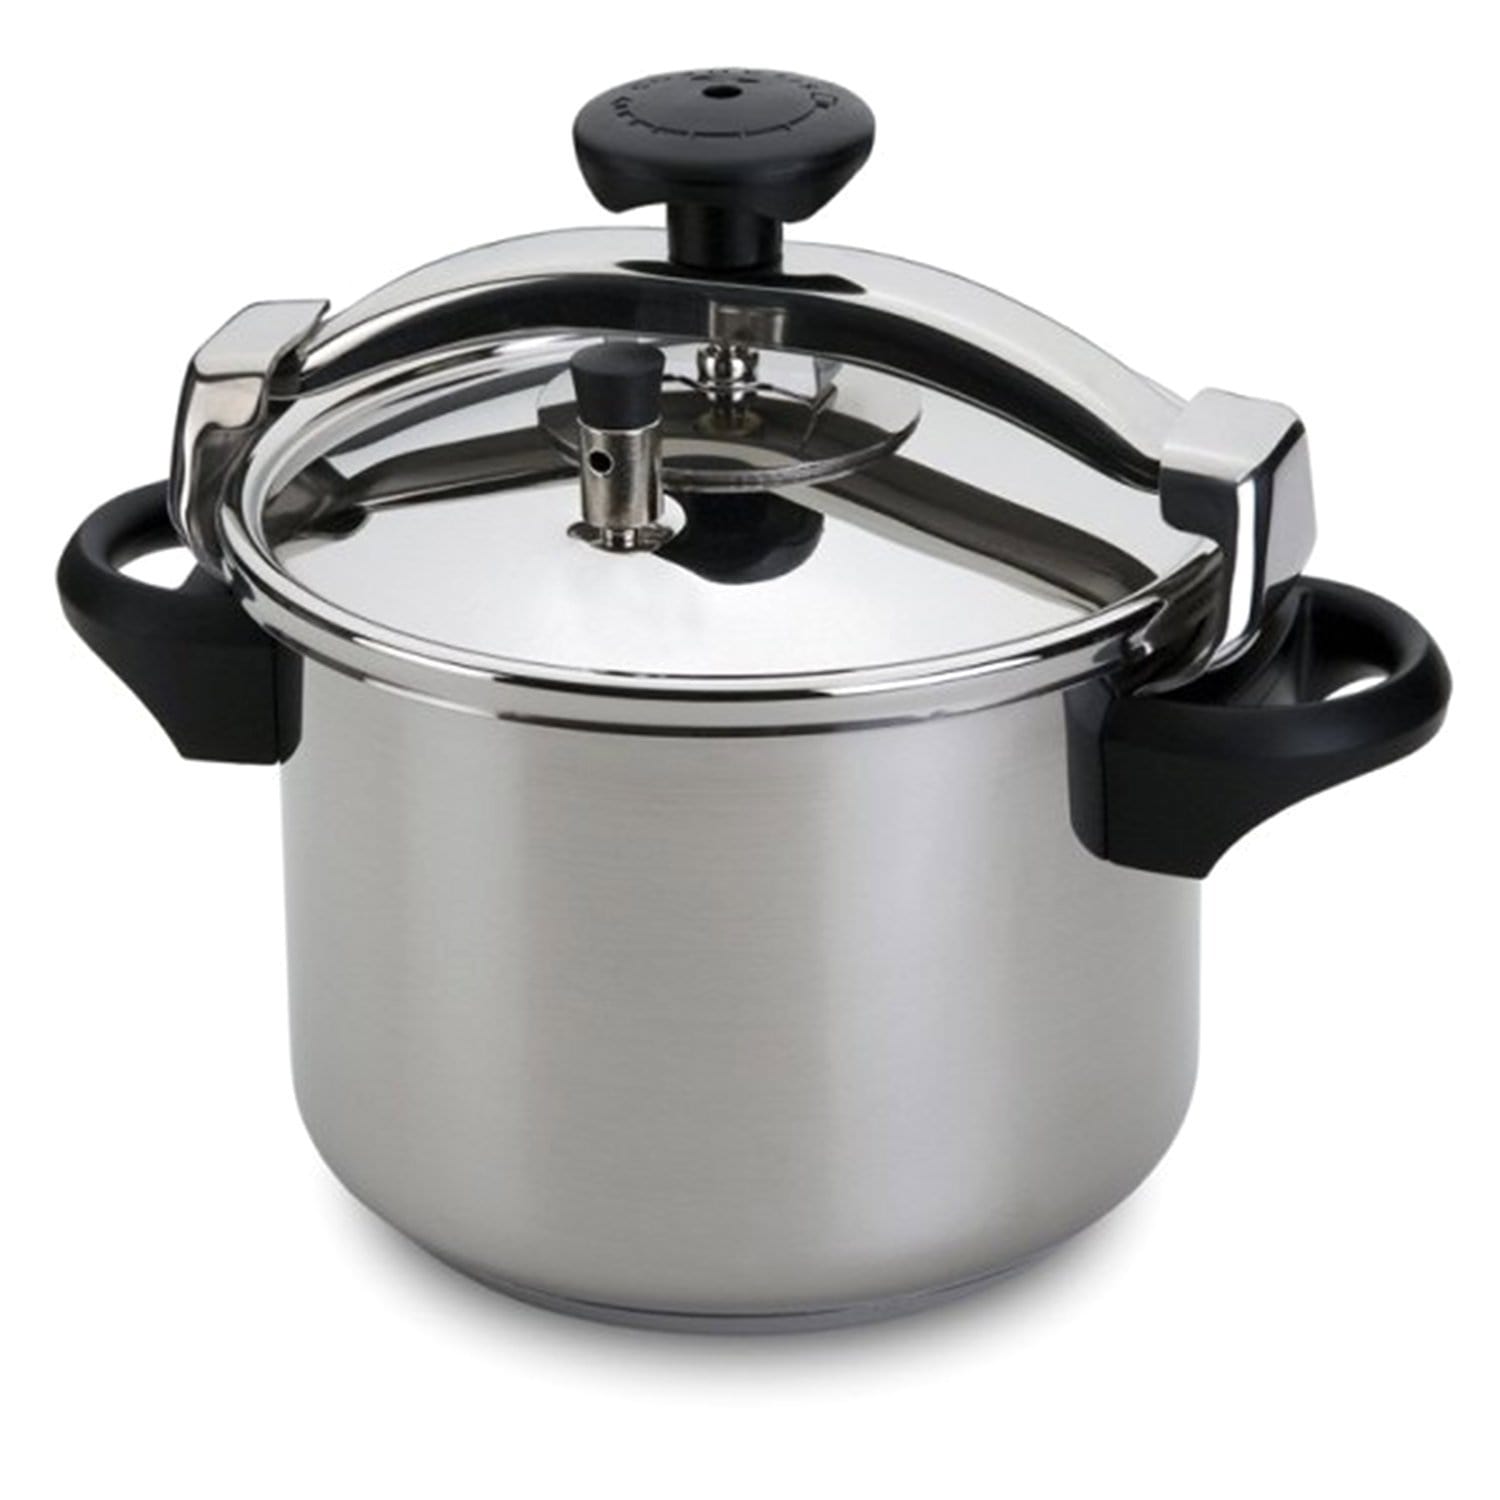 Silampos Pressure Cooker with Basket - Silver, 4.5L - 641122018645B - Jashanmal Home